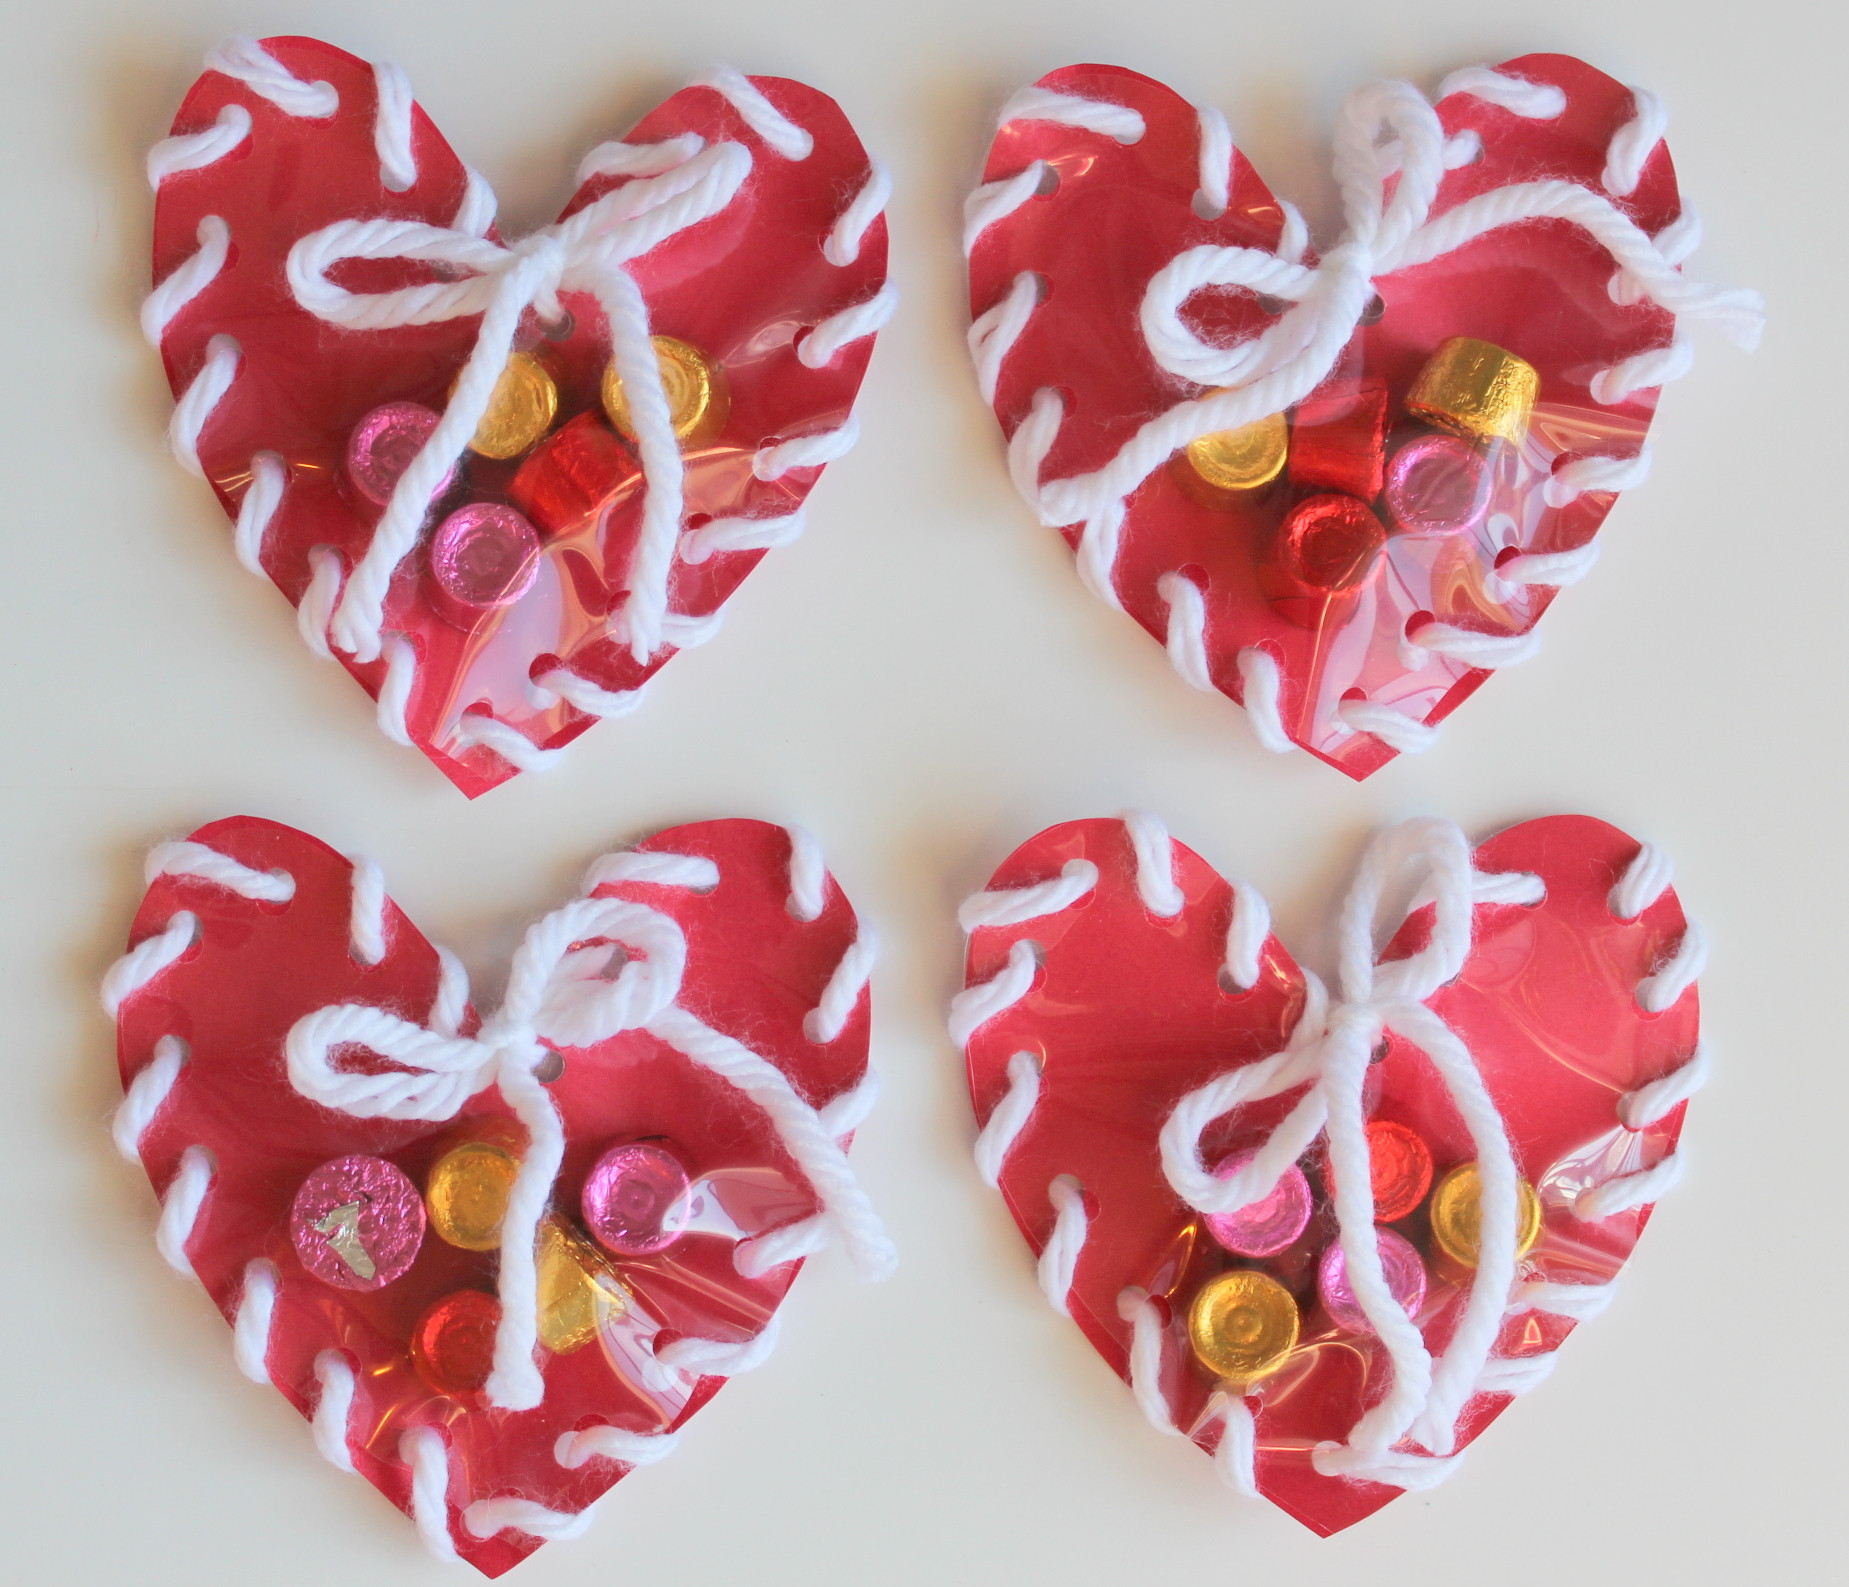 Valentines Day Paper Craft
 Lollydot Hand Sewn Paper Heart Valentine Craft for Kids